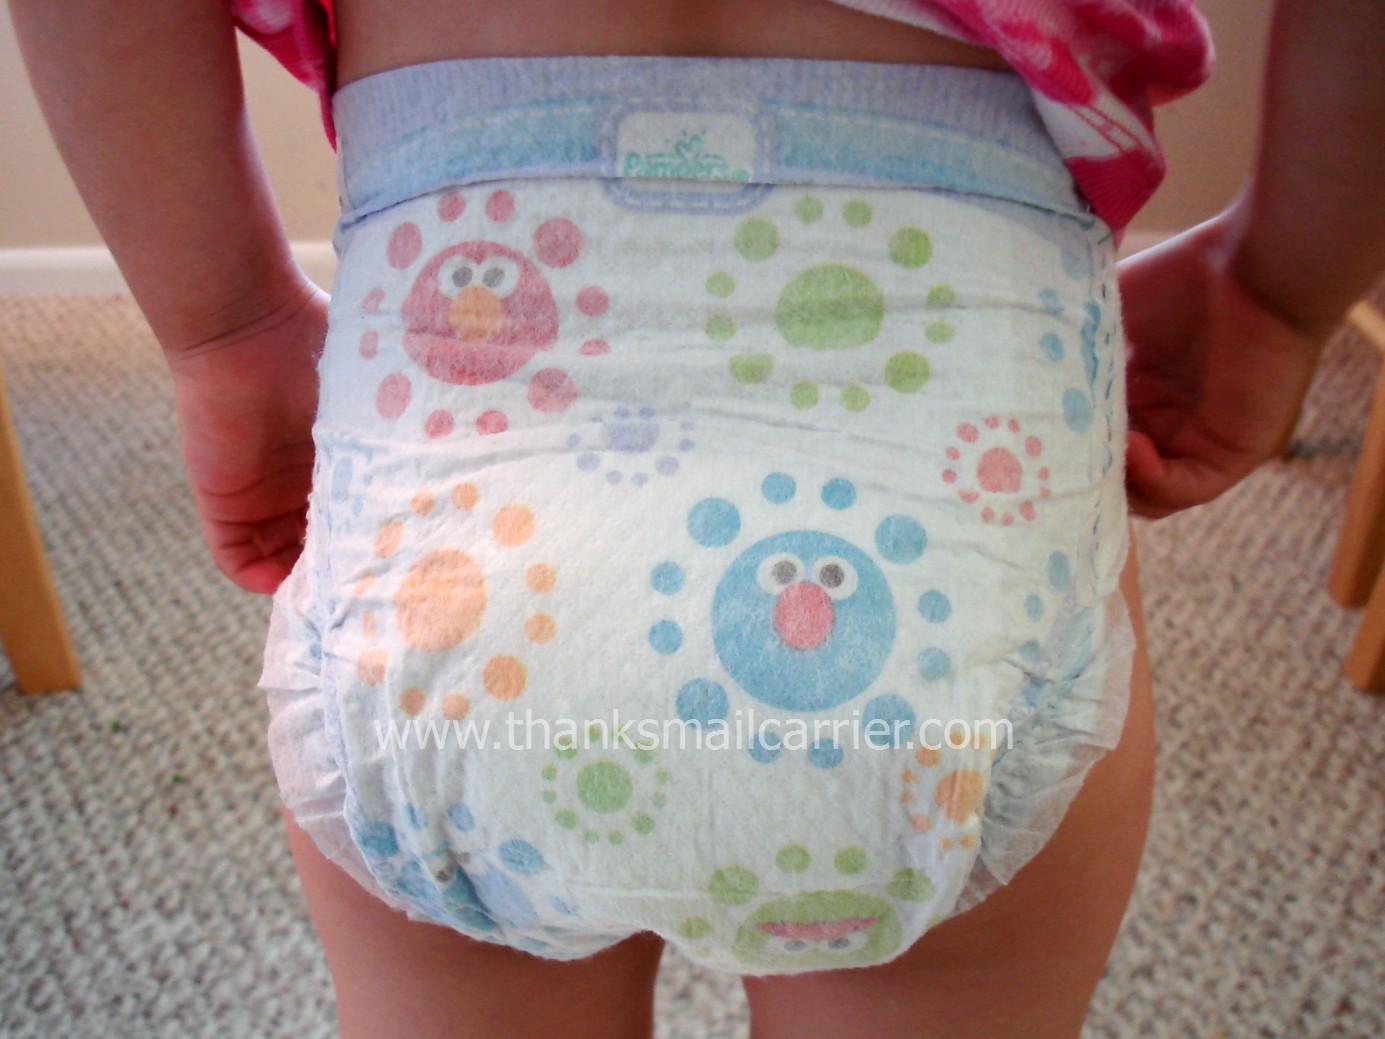 Pampers Cruisers Diapers New Improvements Review & Giveaway.